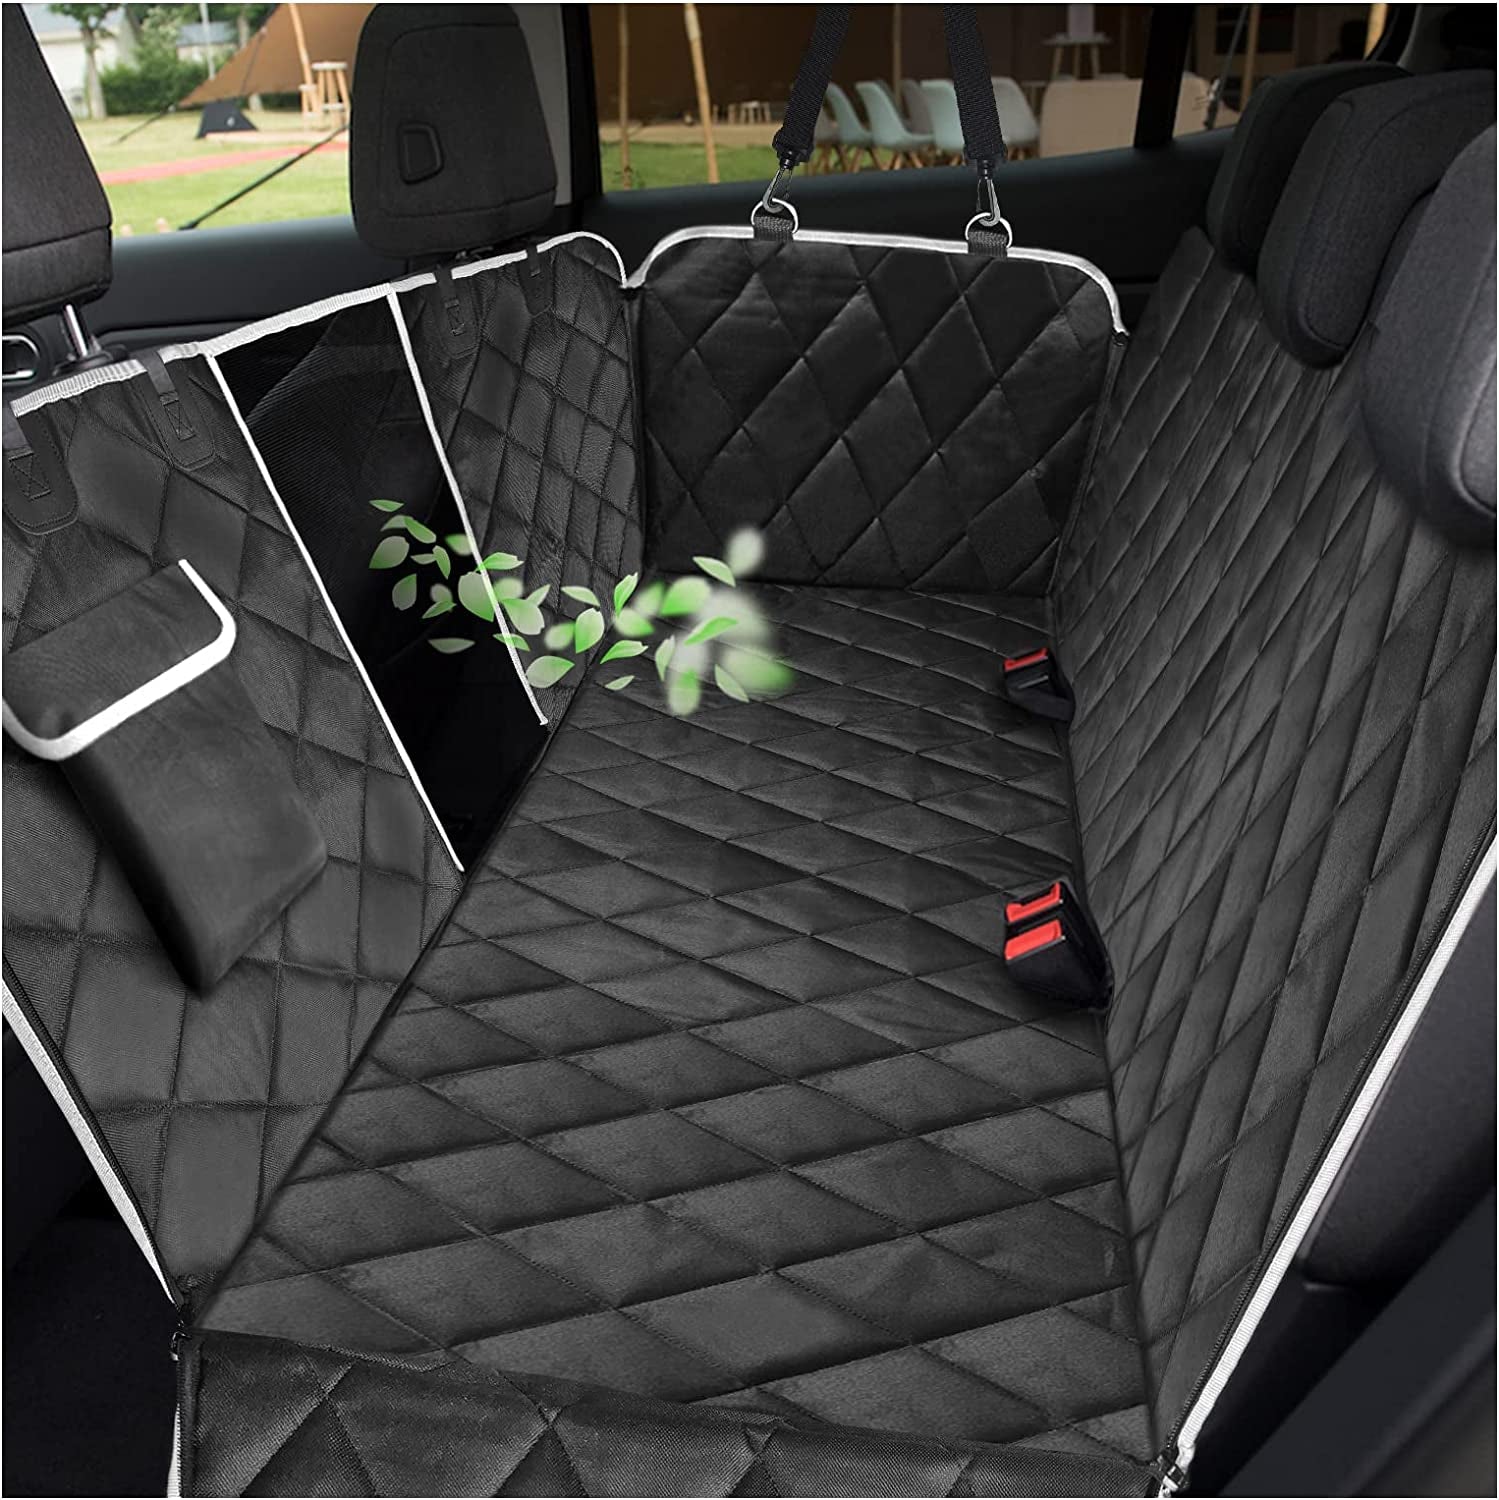 Premium Hammock Dog Car Seat Cover For Trucks With Mesh Window For Stress  Free Travel, Heavy Duty, Waterproof And Scratchproof Pet Seat Cover